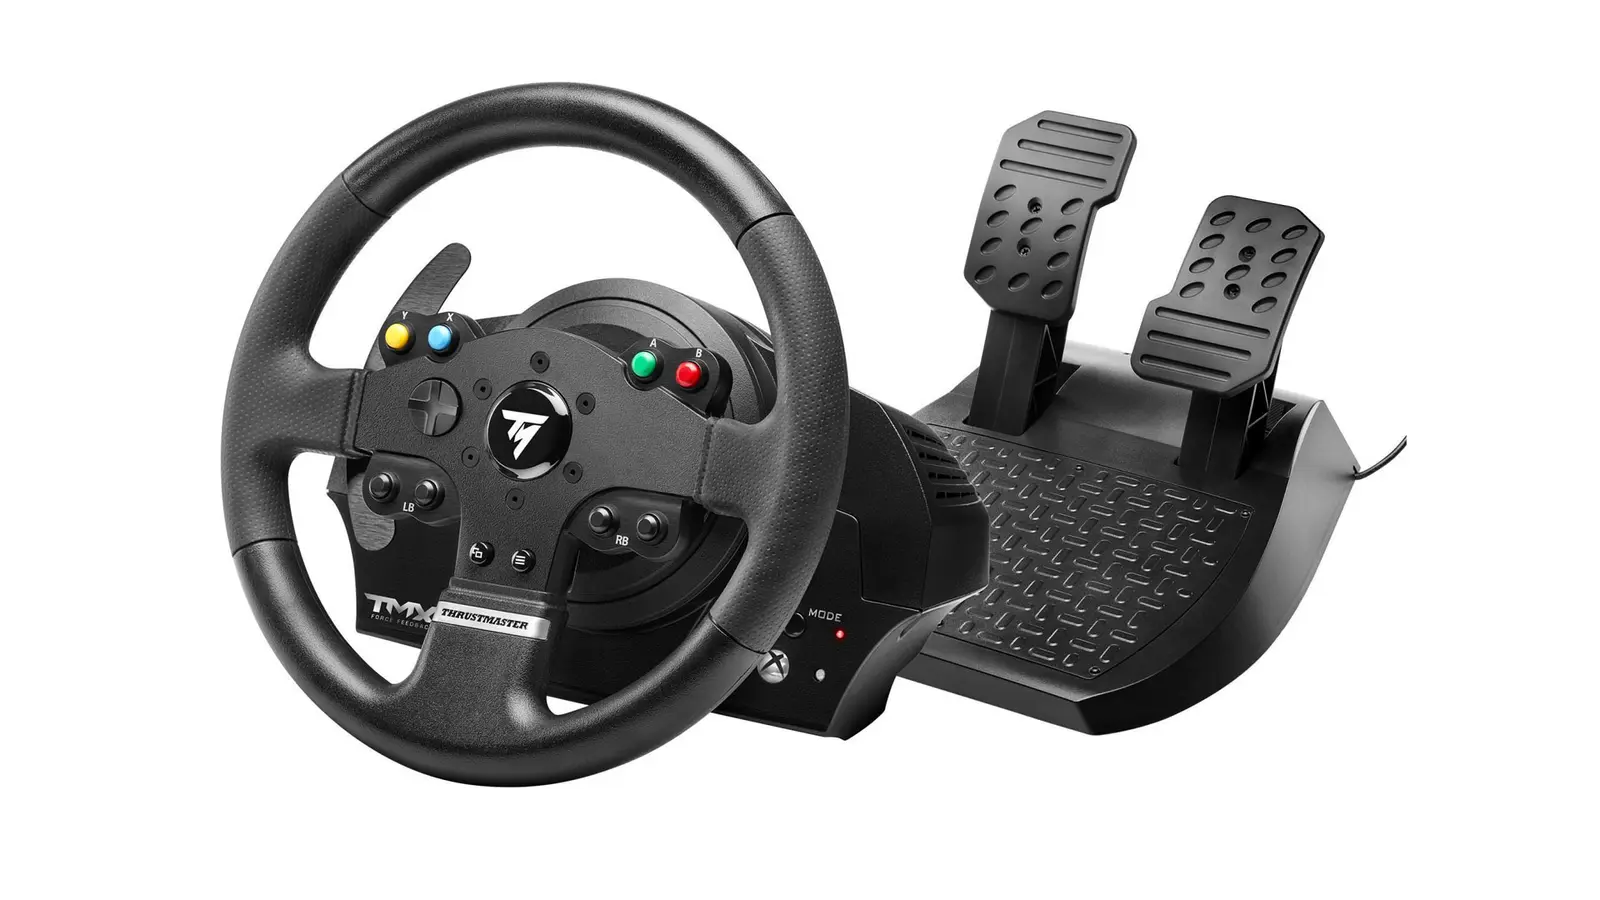 Thrustmaster TMX product image of a black wheel with yellow, blue, green, and red buttons on the console.